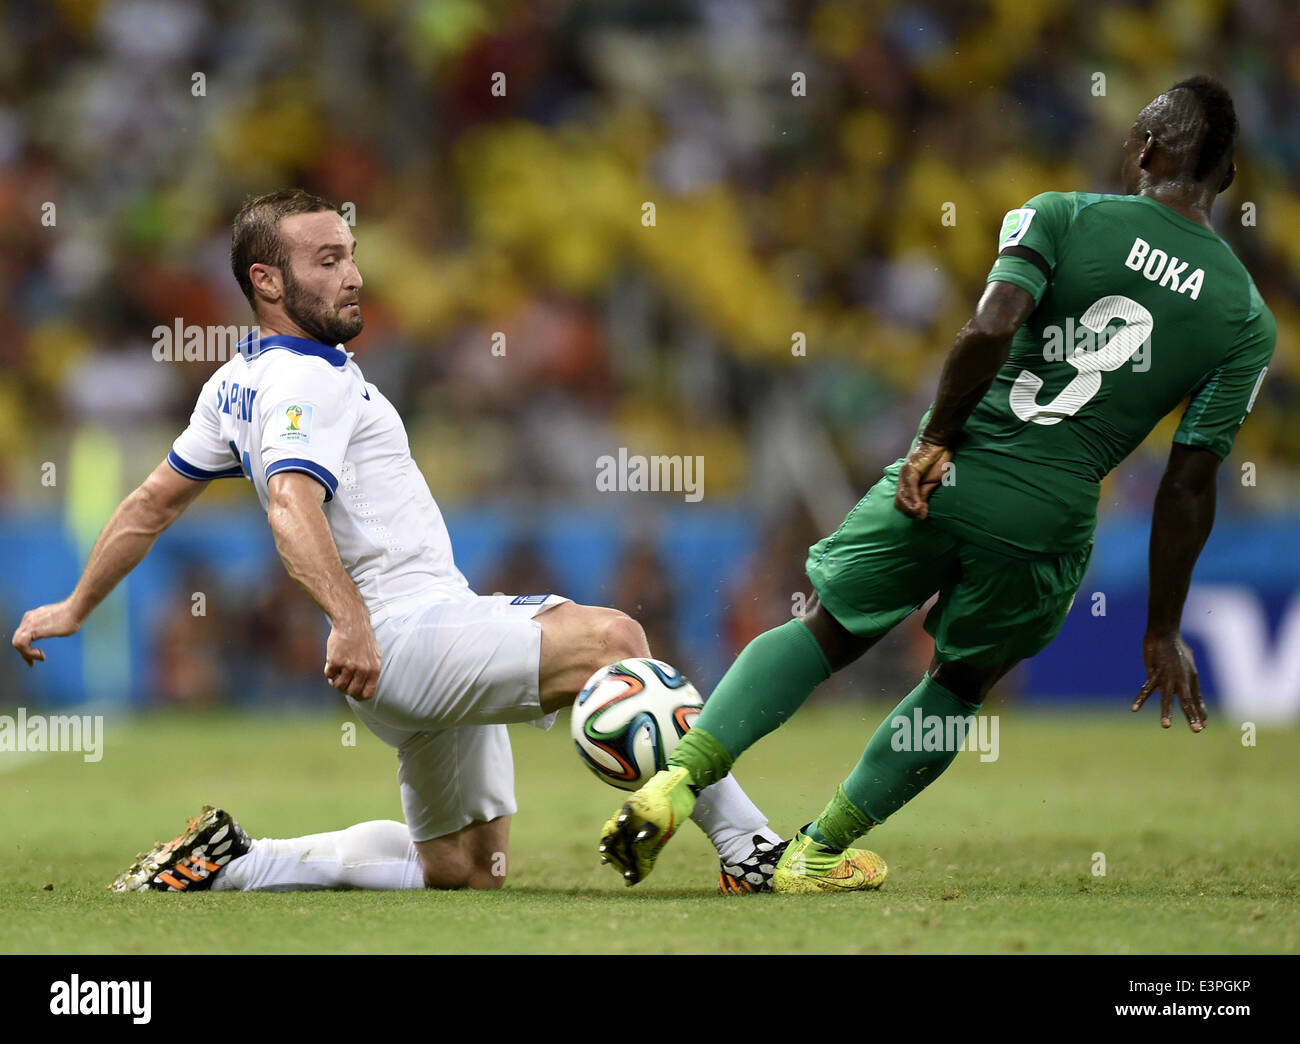 (140624) -- FORTALEZA, June 24, 2014 (Xinhua) -- Greece's Dimitris Salpingidis (L) vies with Cote d'Ivoire's Arthur Boka during a Group C match between Greece and Cote d'Ivoire of 2014 FIFA World Cup at the Estadio Castelao Stadium in Fortaleza, Brazil, June 24, 2014. (Xinhua/Yang Lei)(xzj) Stock Photo